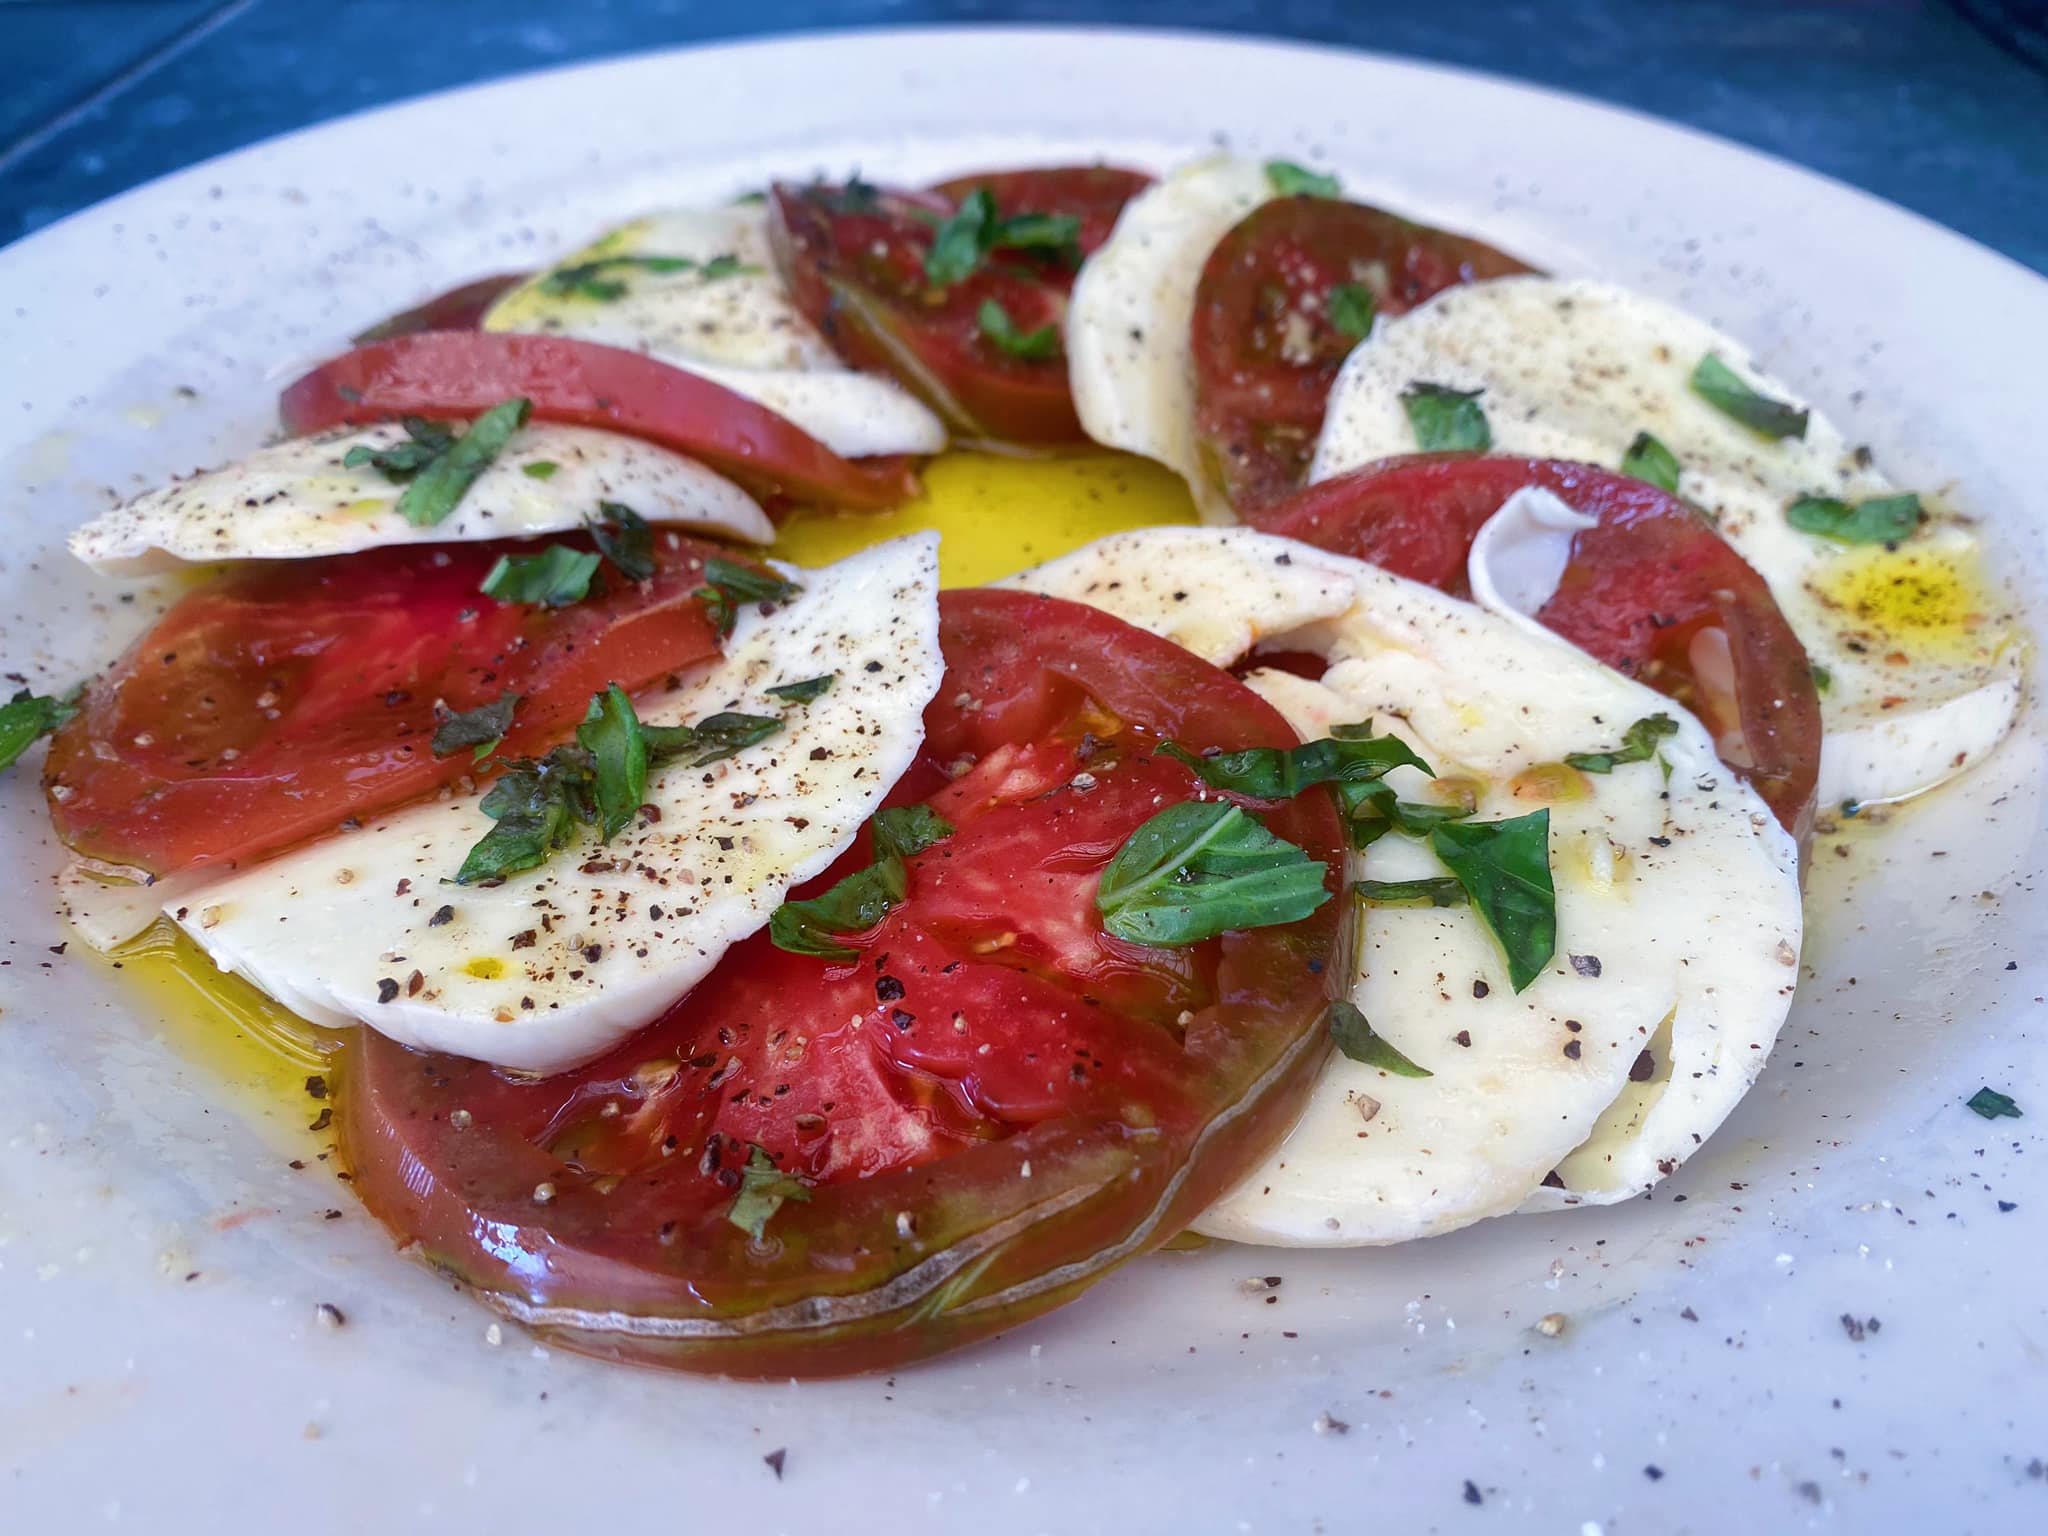 An insalata caprese made with heirloom tomatoes.